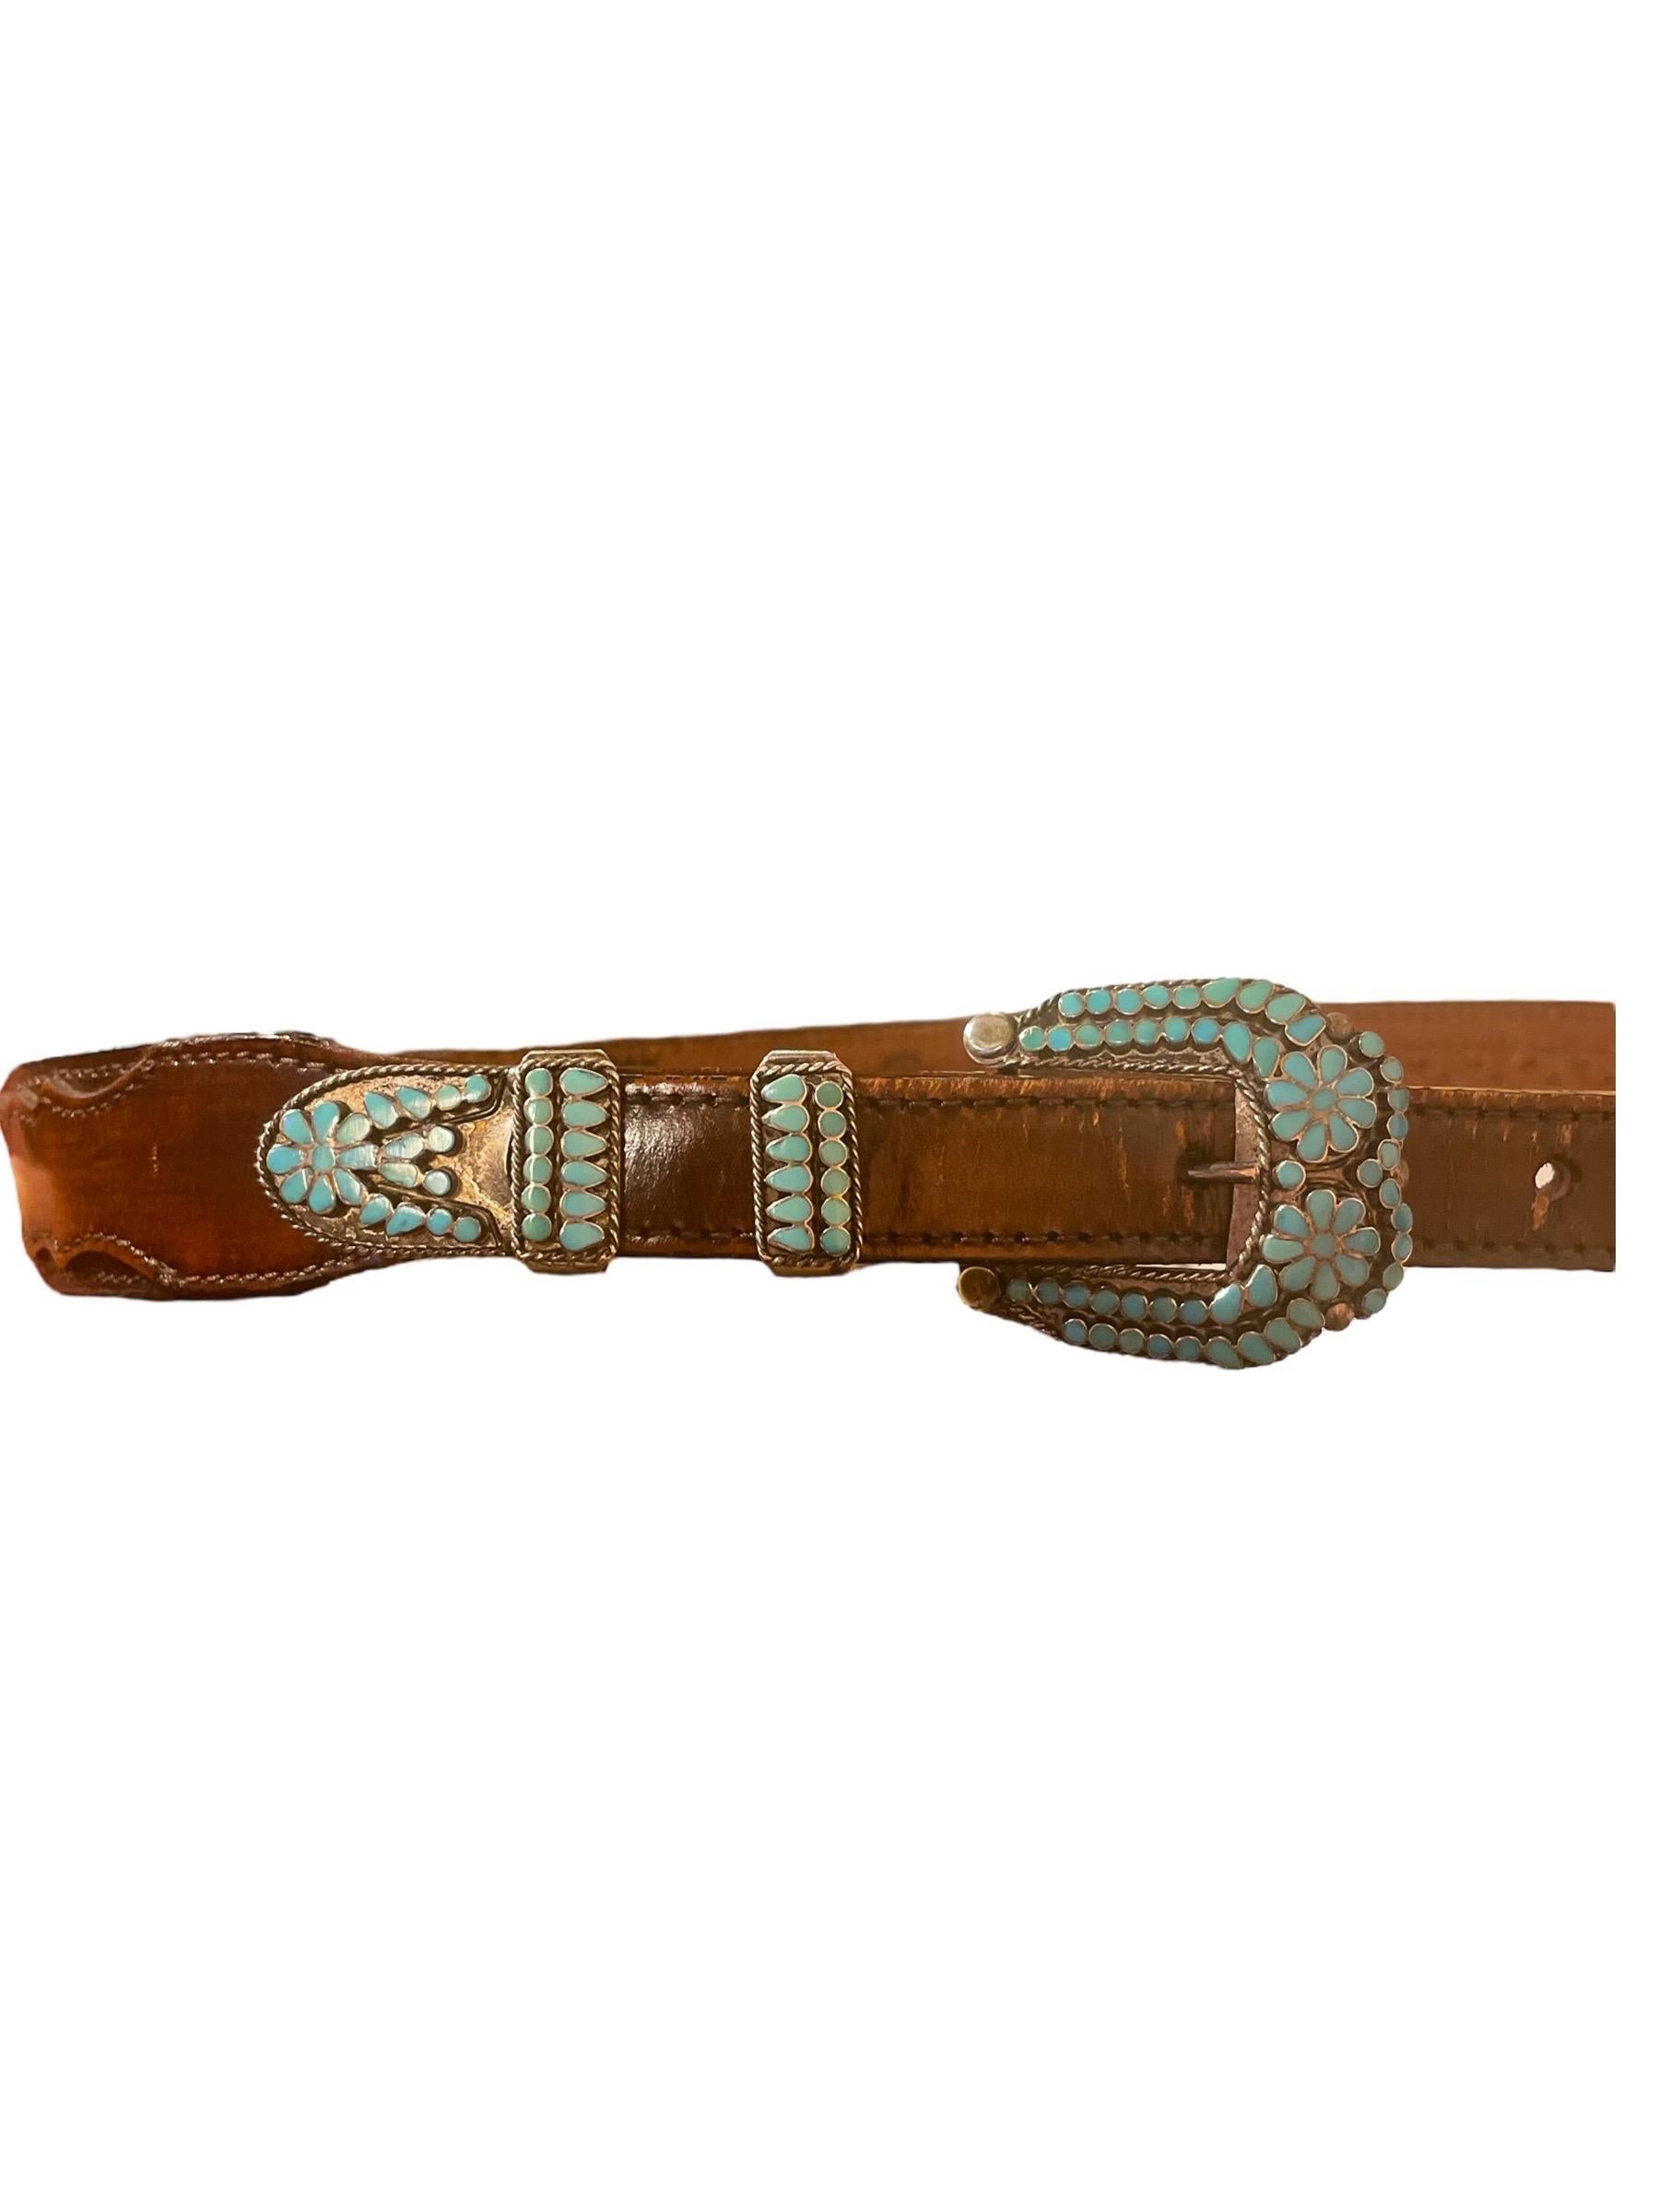 Vintage Native American Inlaid Turquoise, Silver & Hand-tooled Leather Belt 2